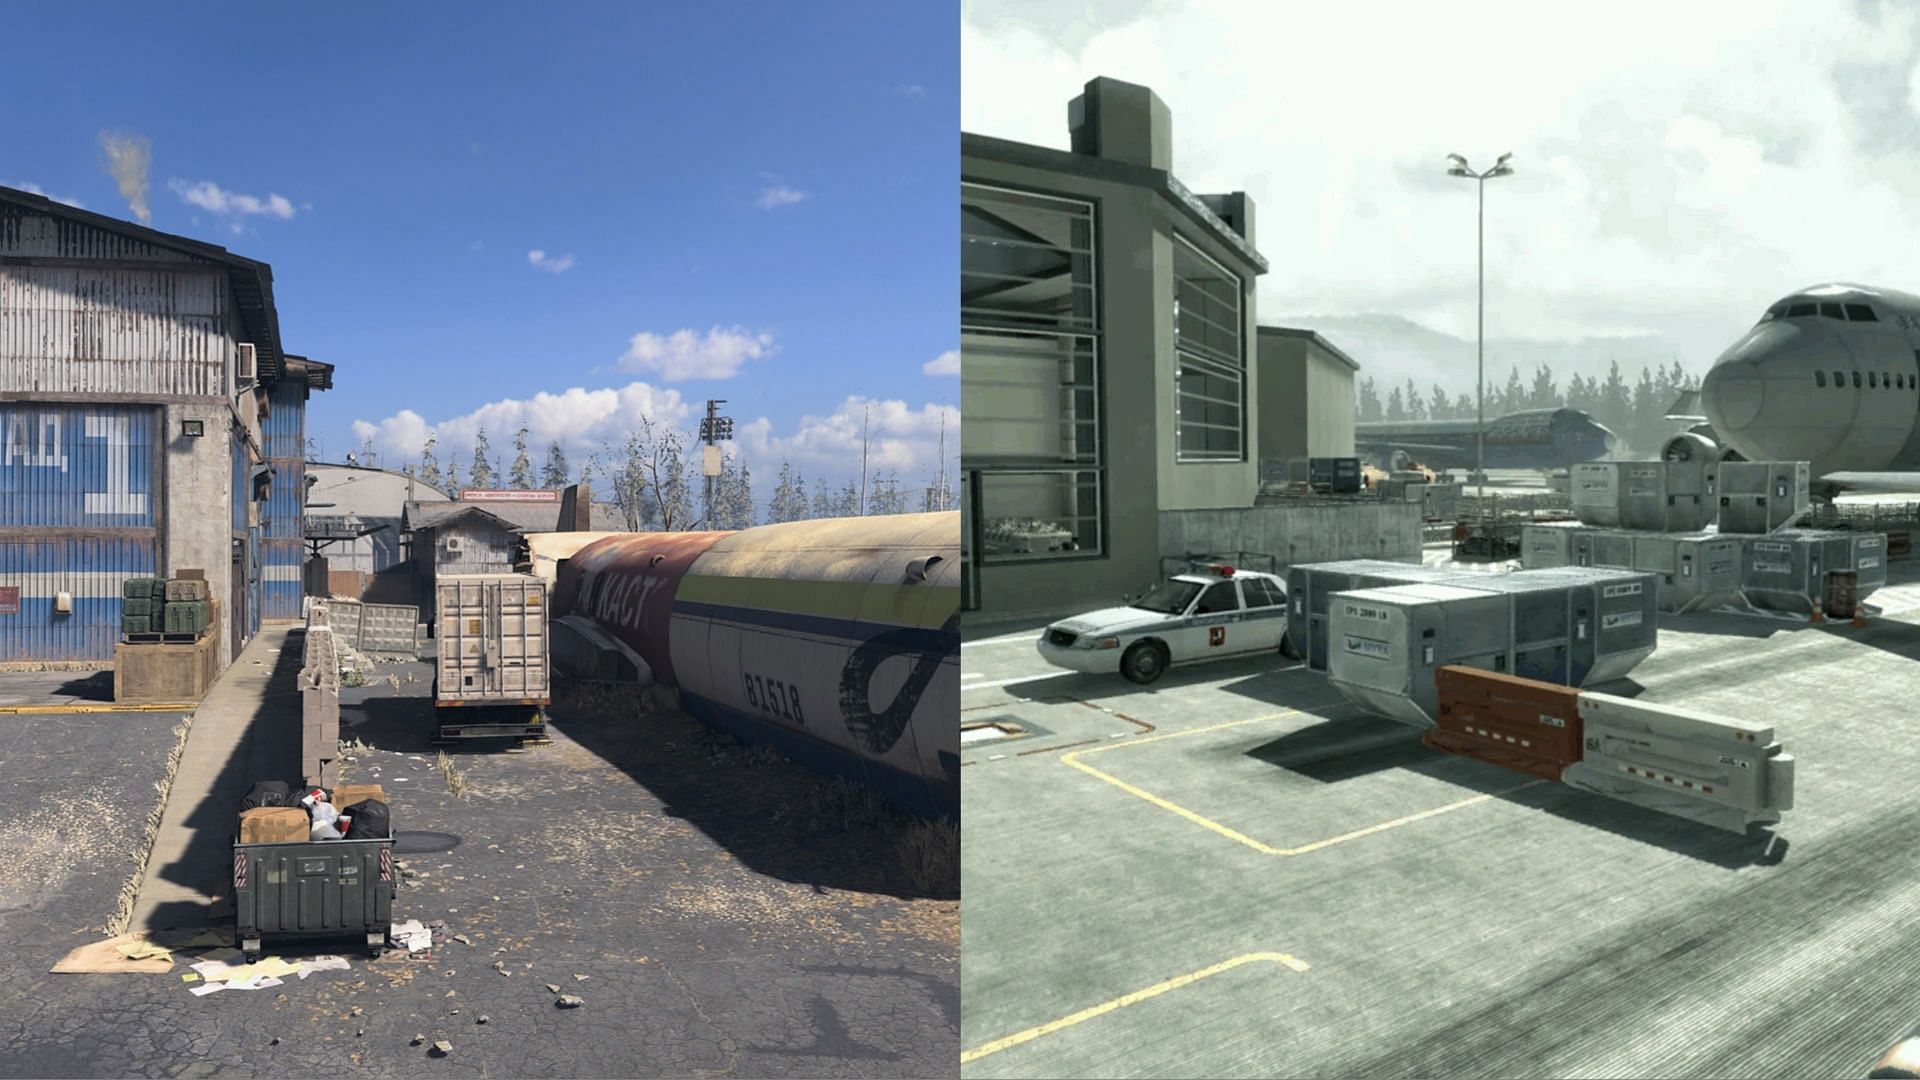 CoD 2023 leak reveals it's called MW3 and new Warzone map, release date -  Dexerto